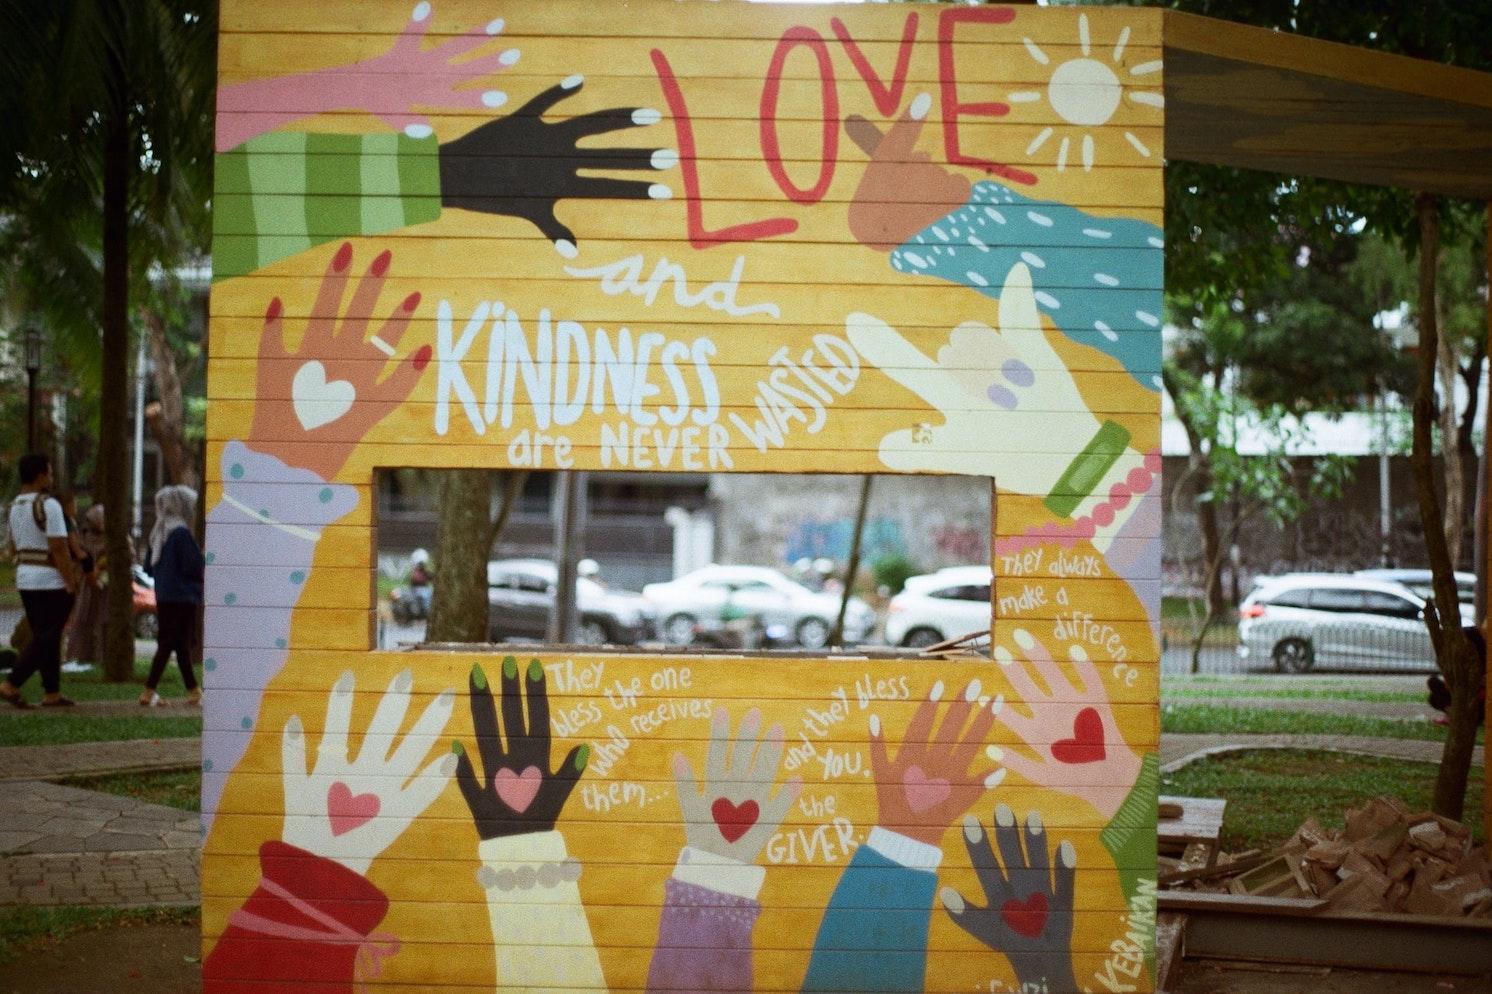 love and kindness are never wasted - art sign - anti-racism - disrupting white culture